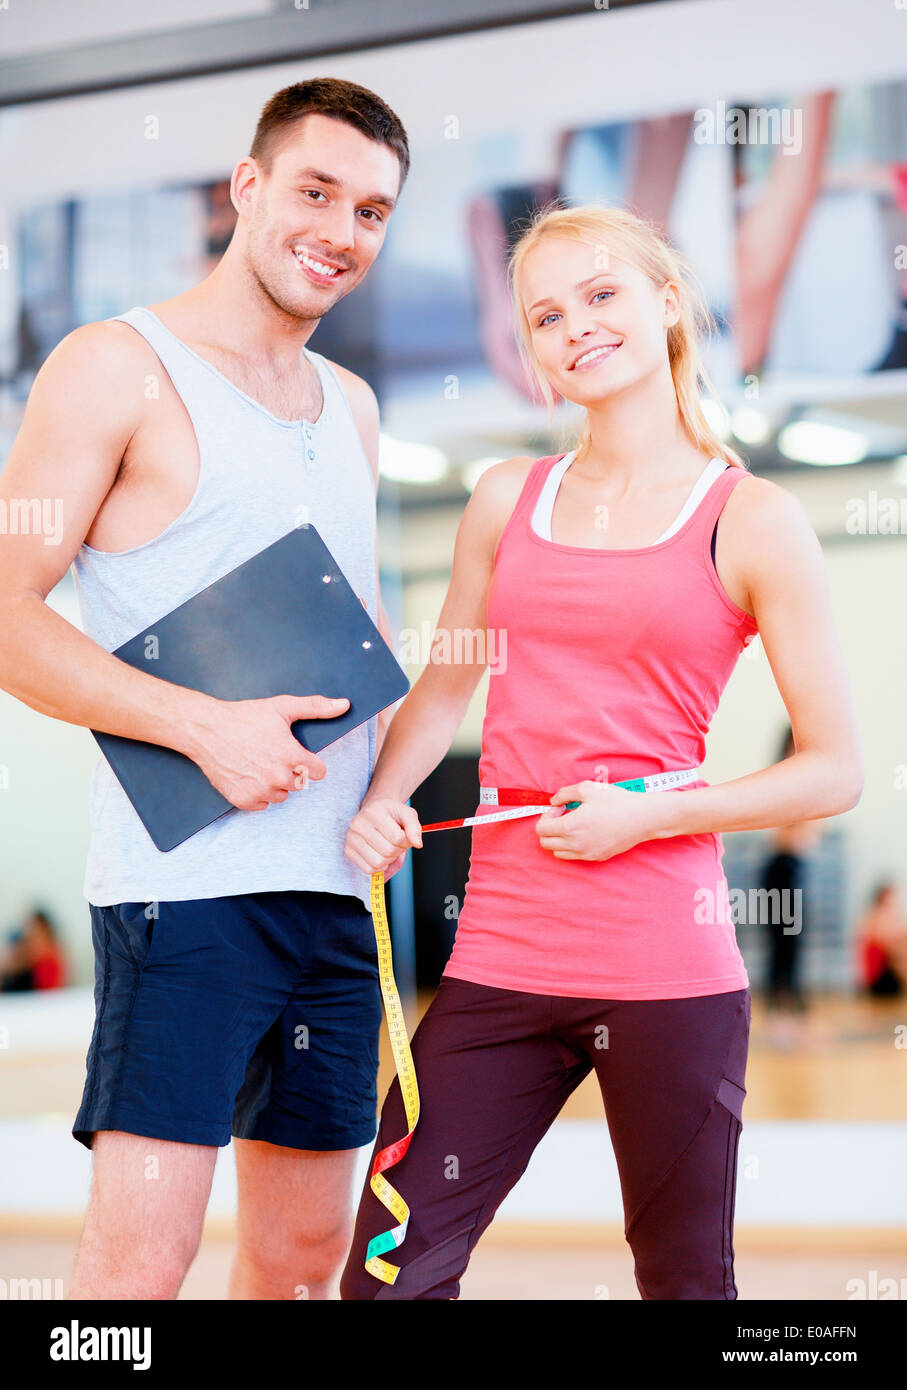 two smiling people with clipboard and measure tape Stock Photo